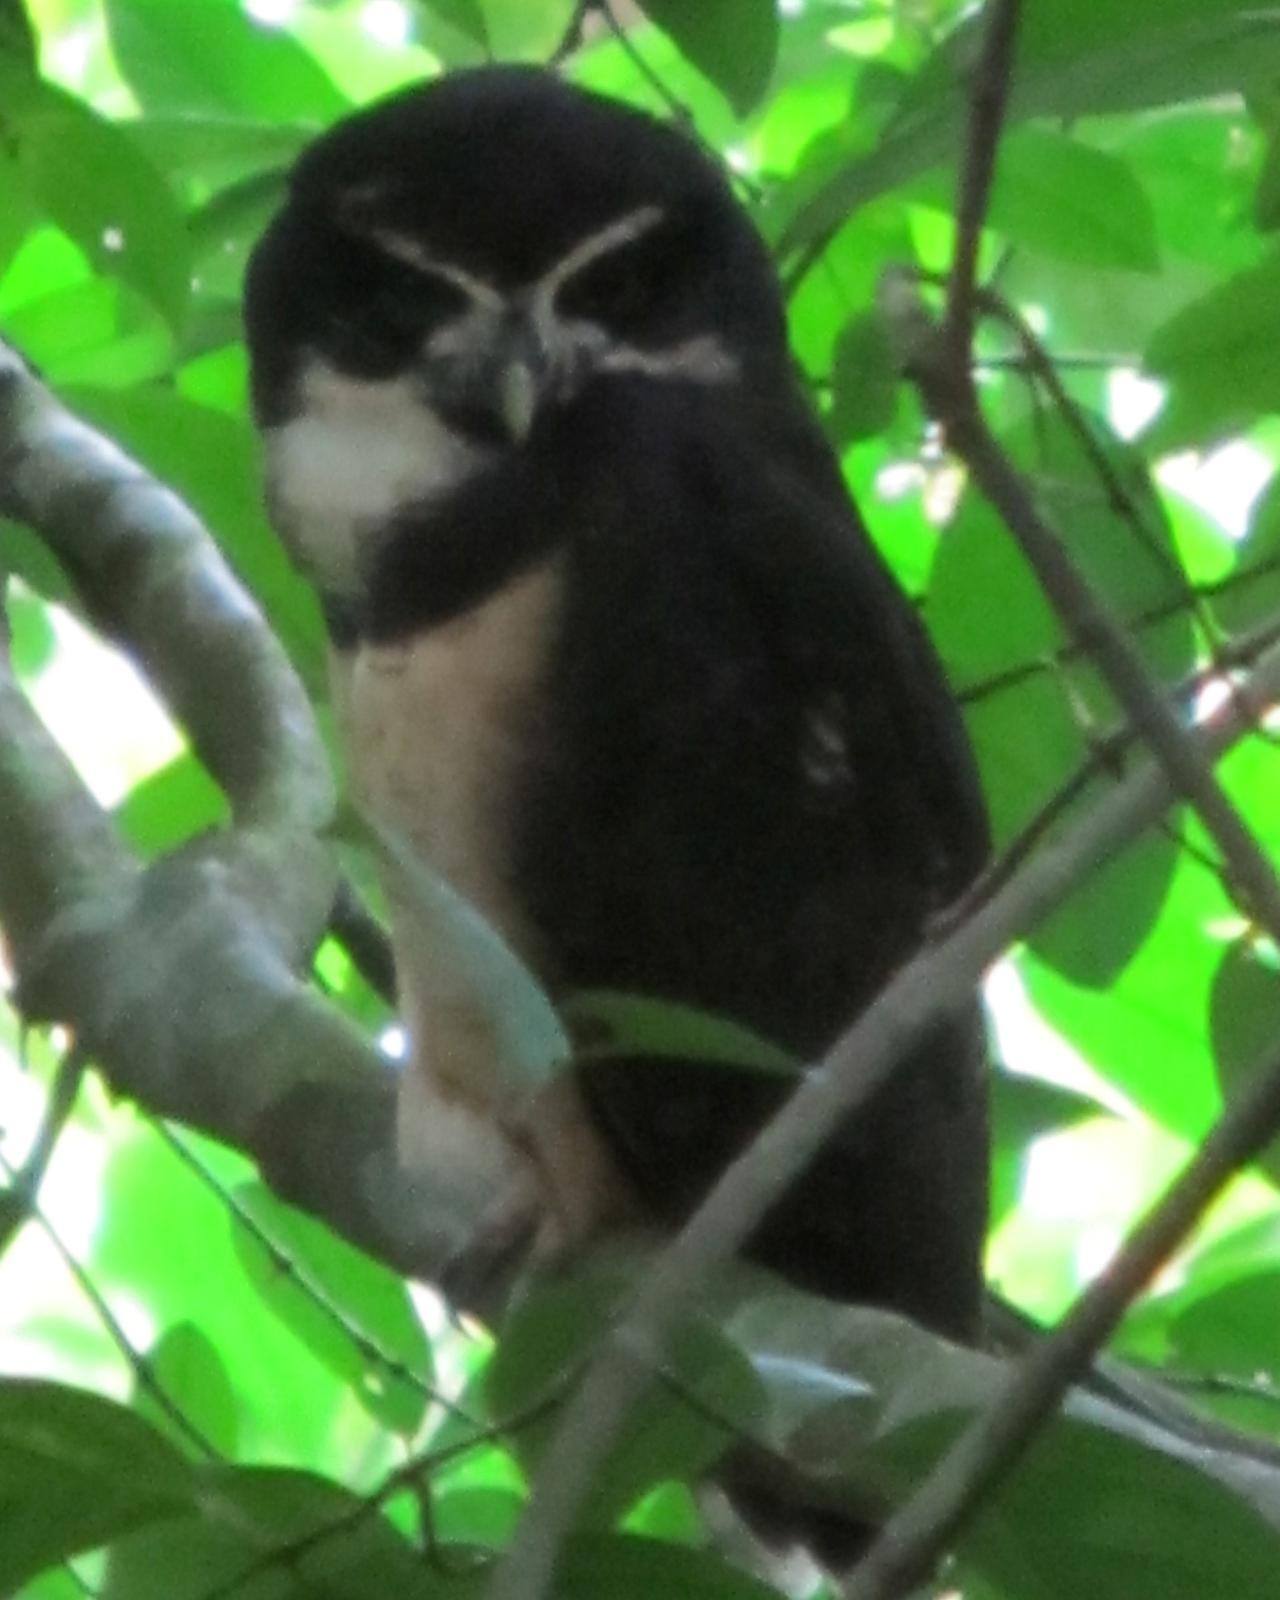 Spectacled Owl Photo by David Bell